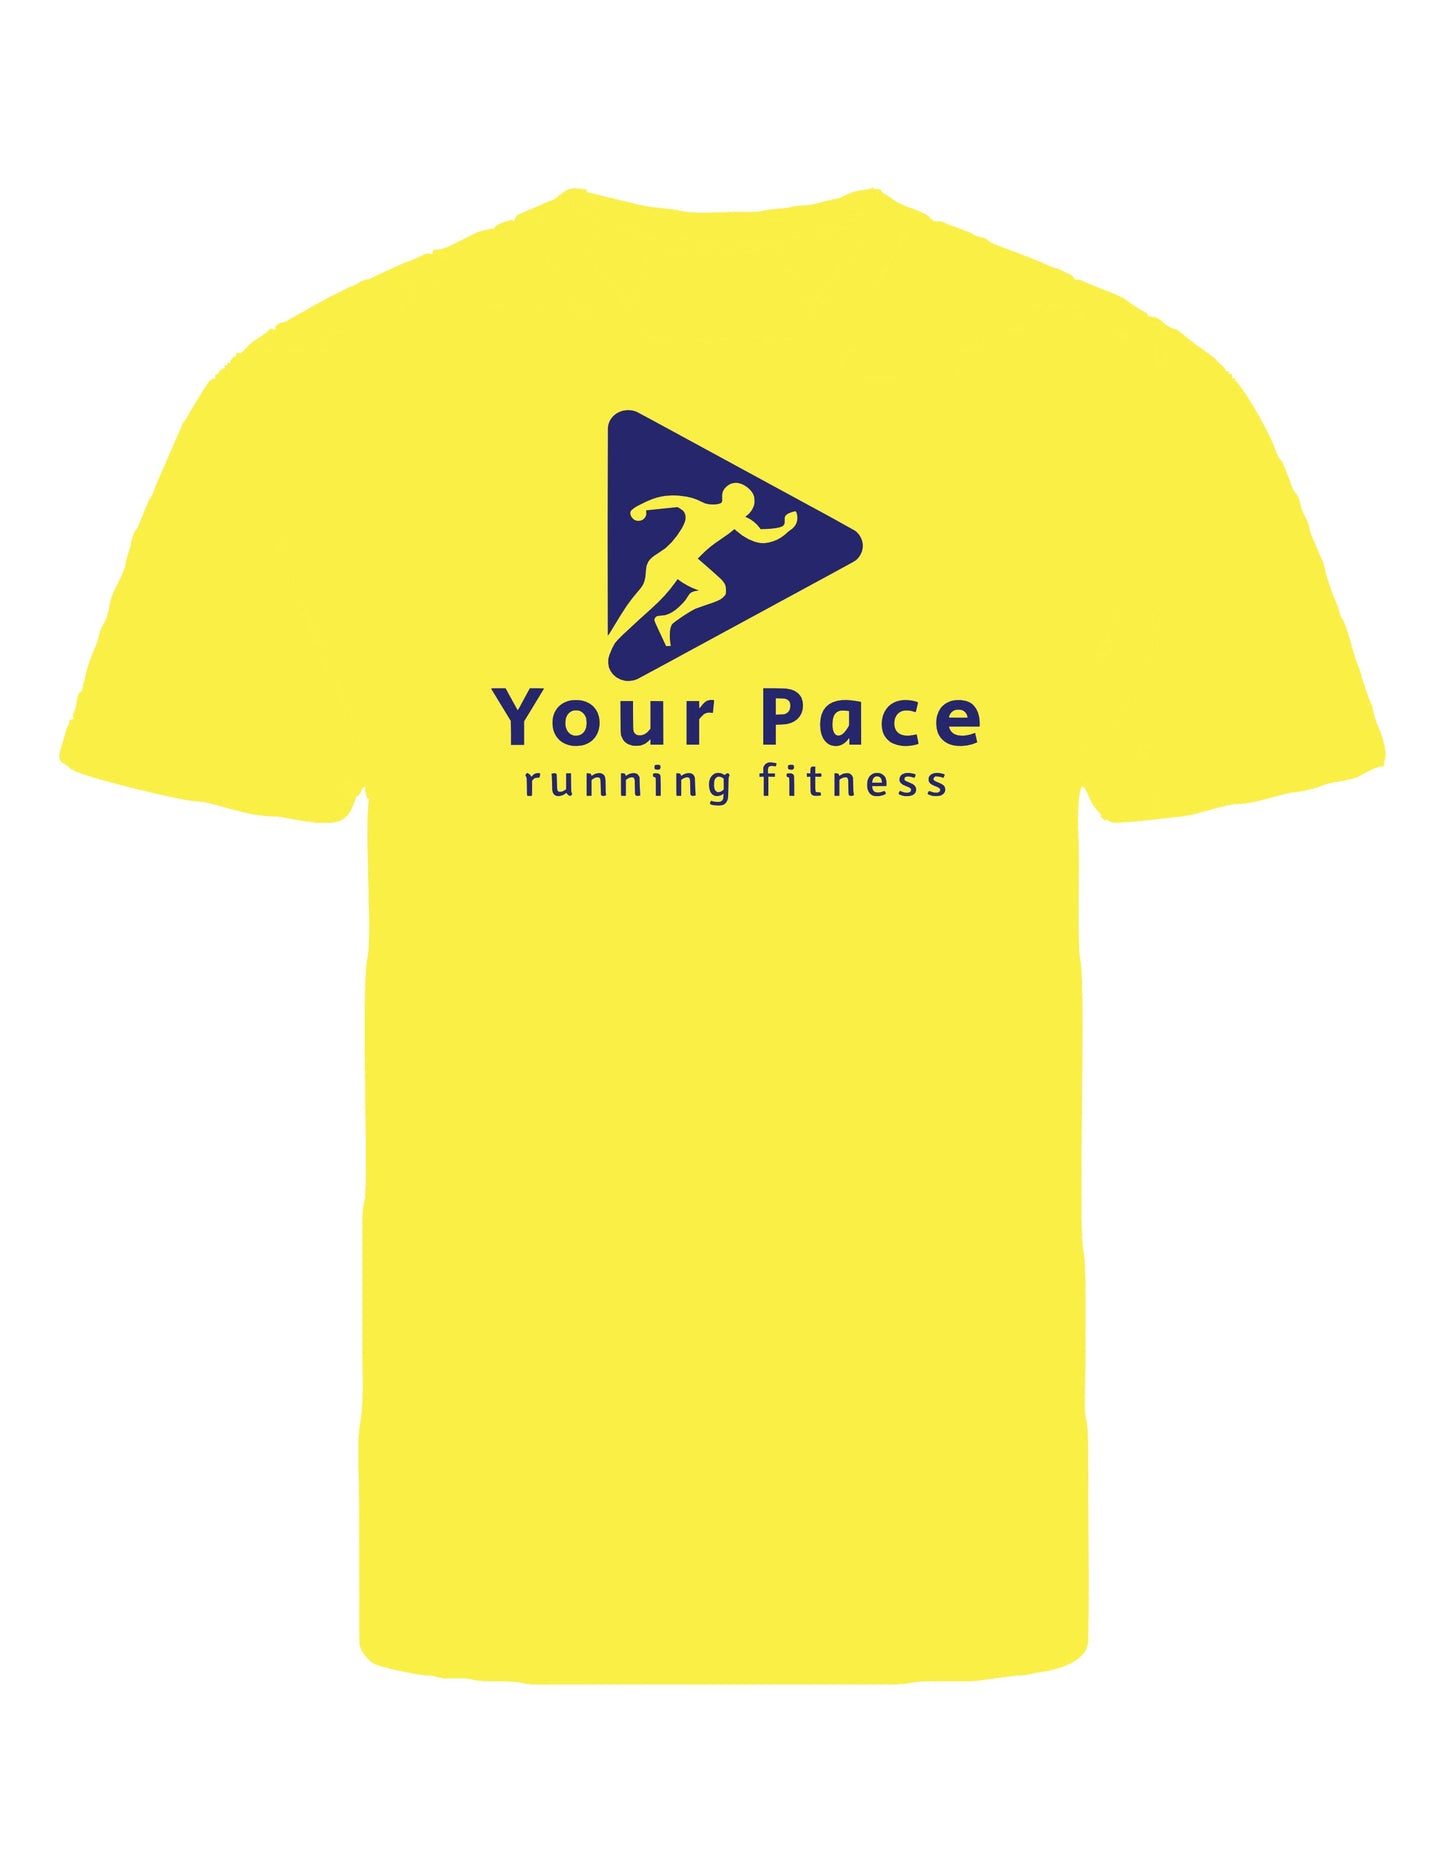 Your Pace - Womens - Yellow Tee